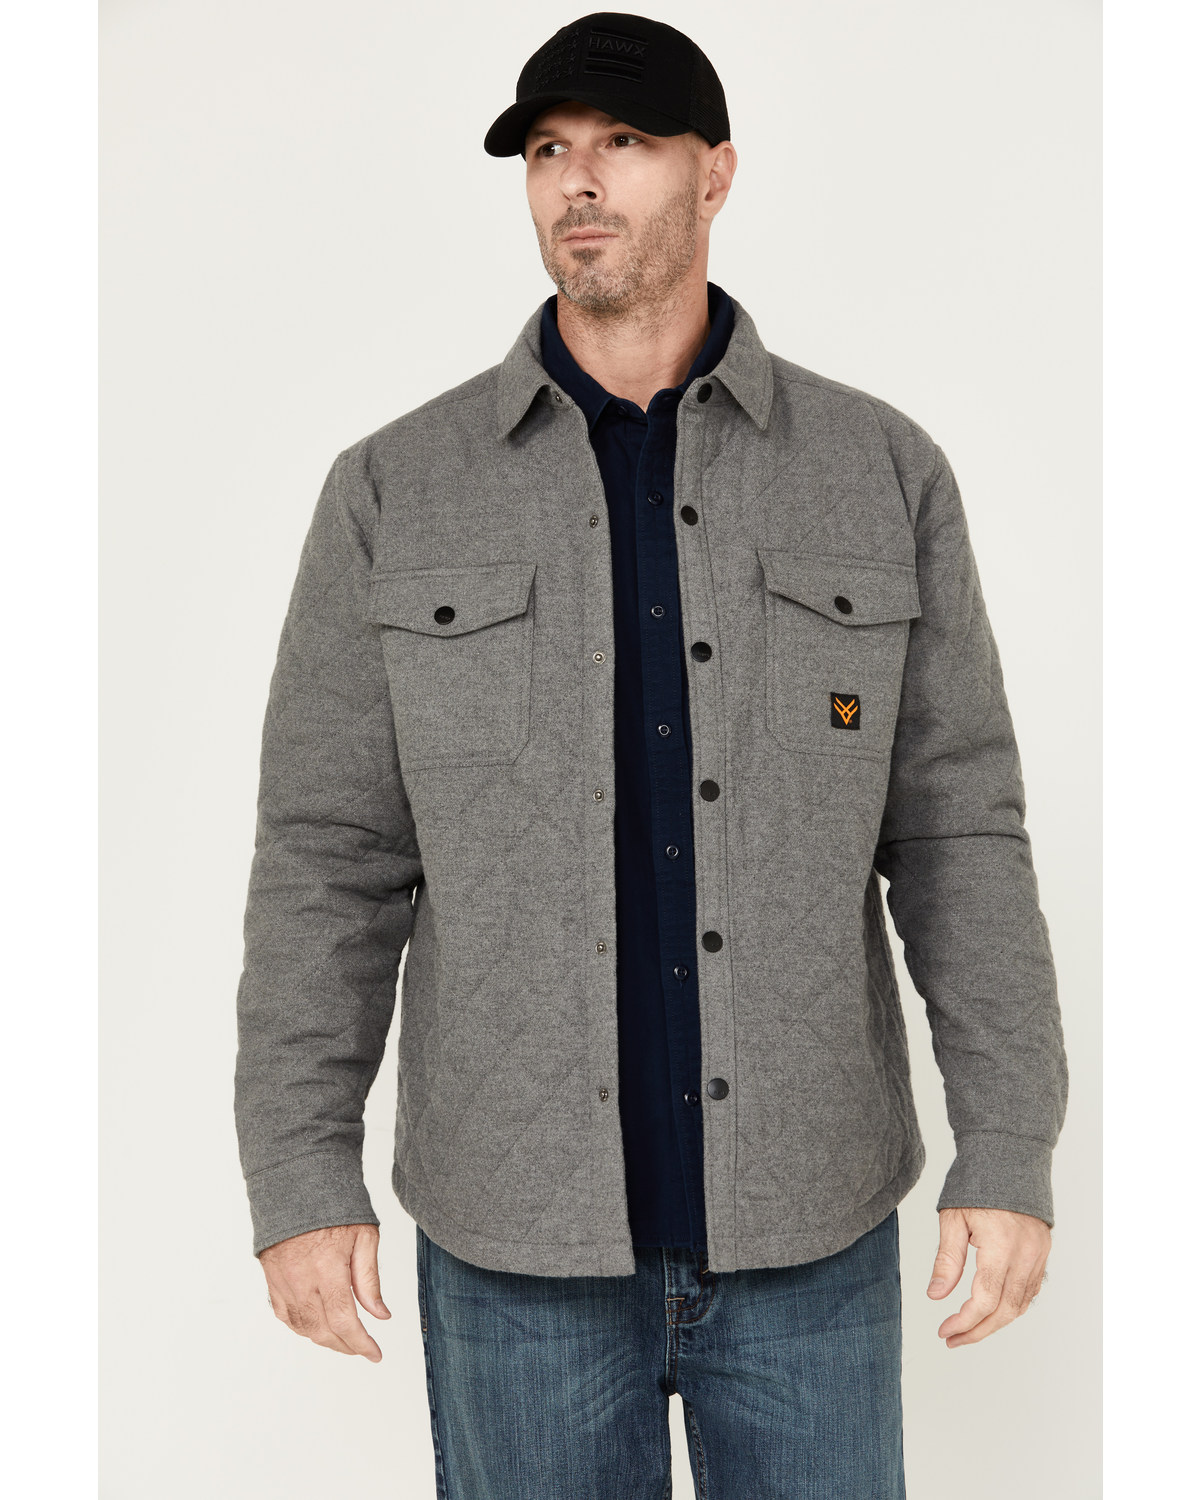 Hawx Men's Quilted Flannel Shirt Jacket